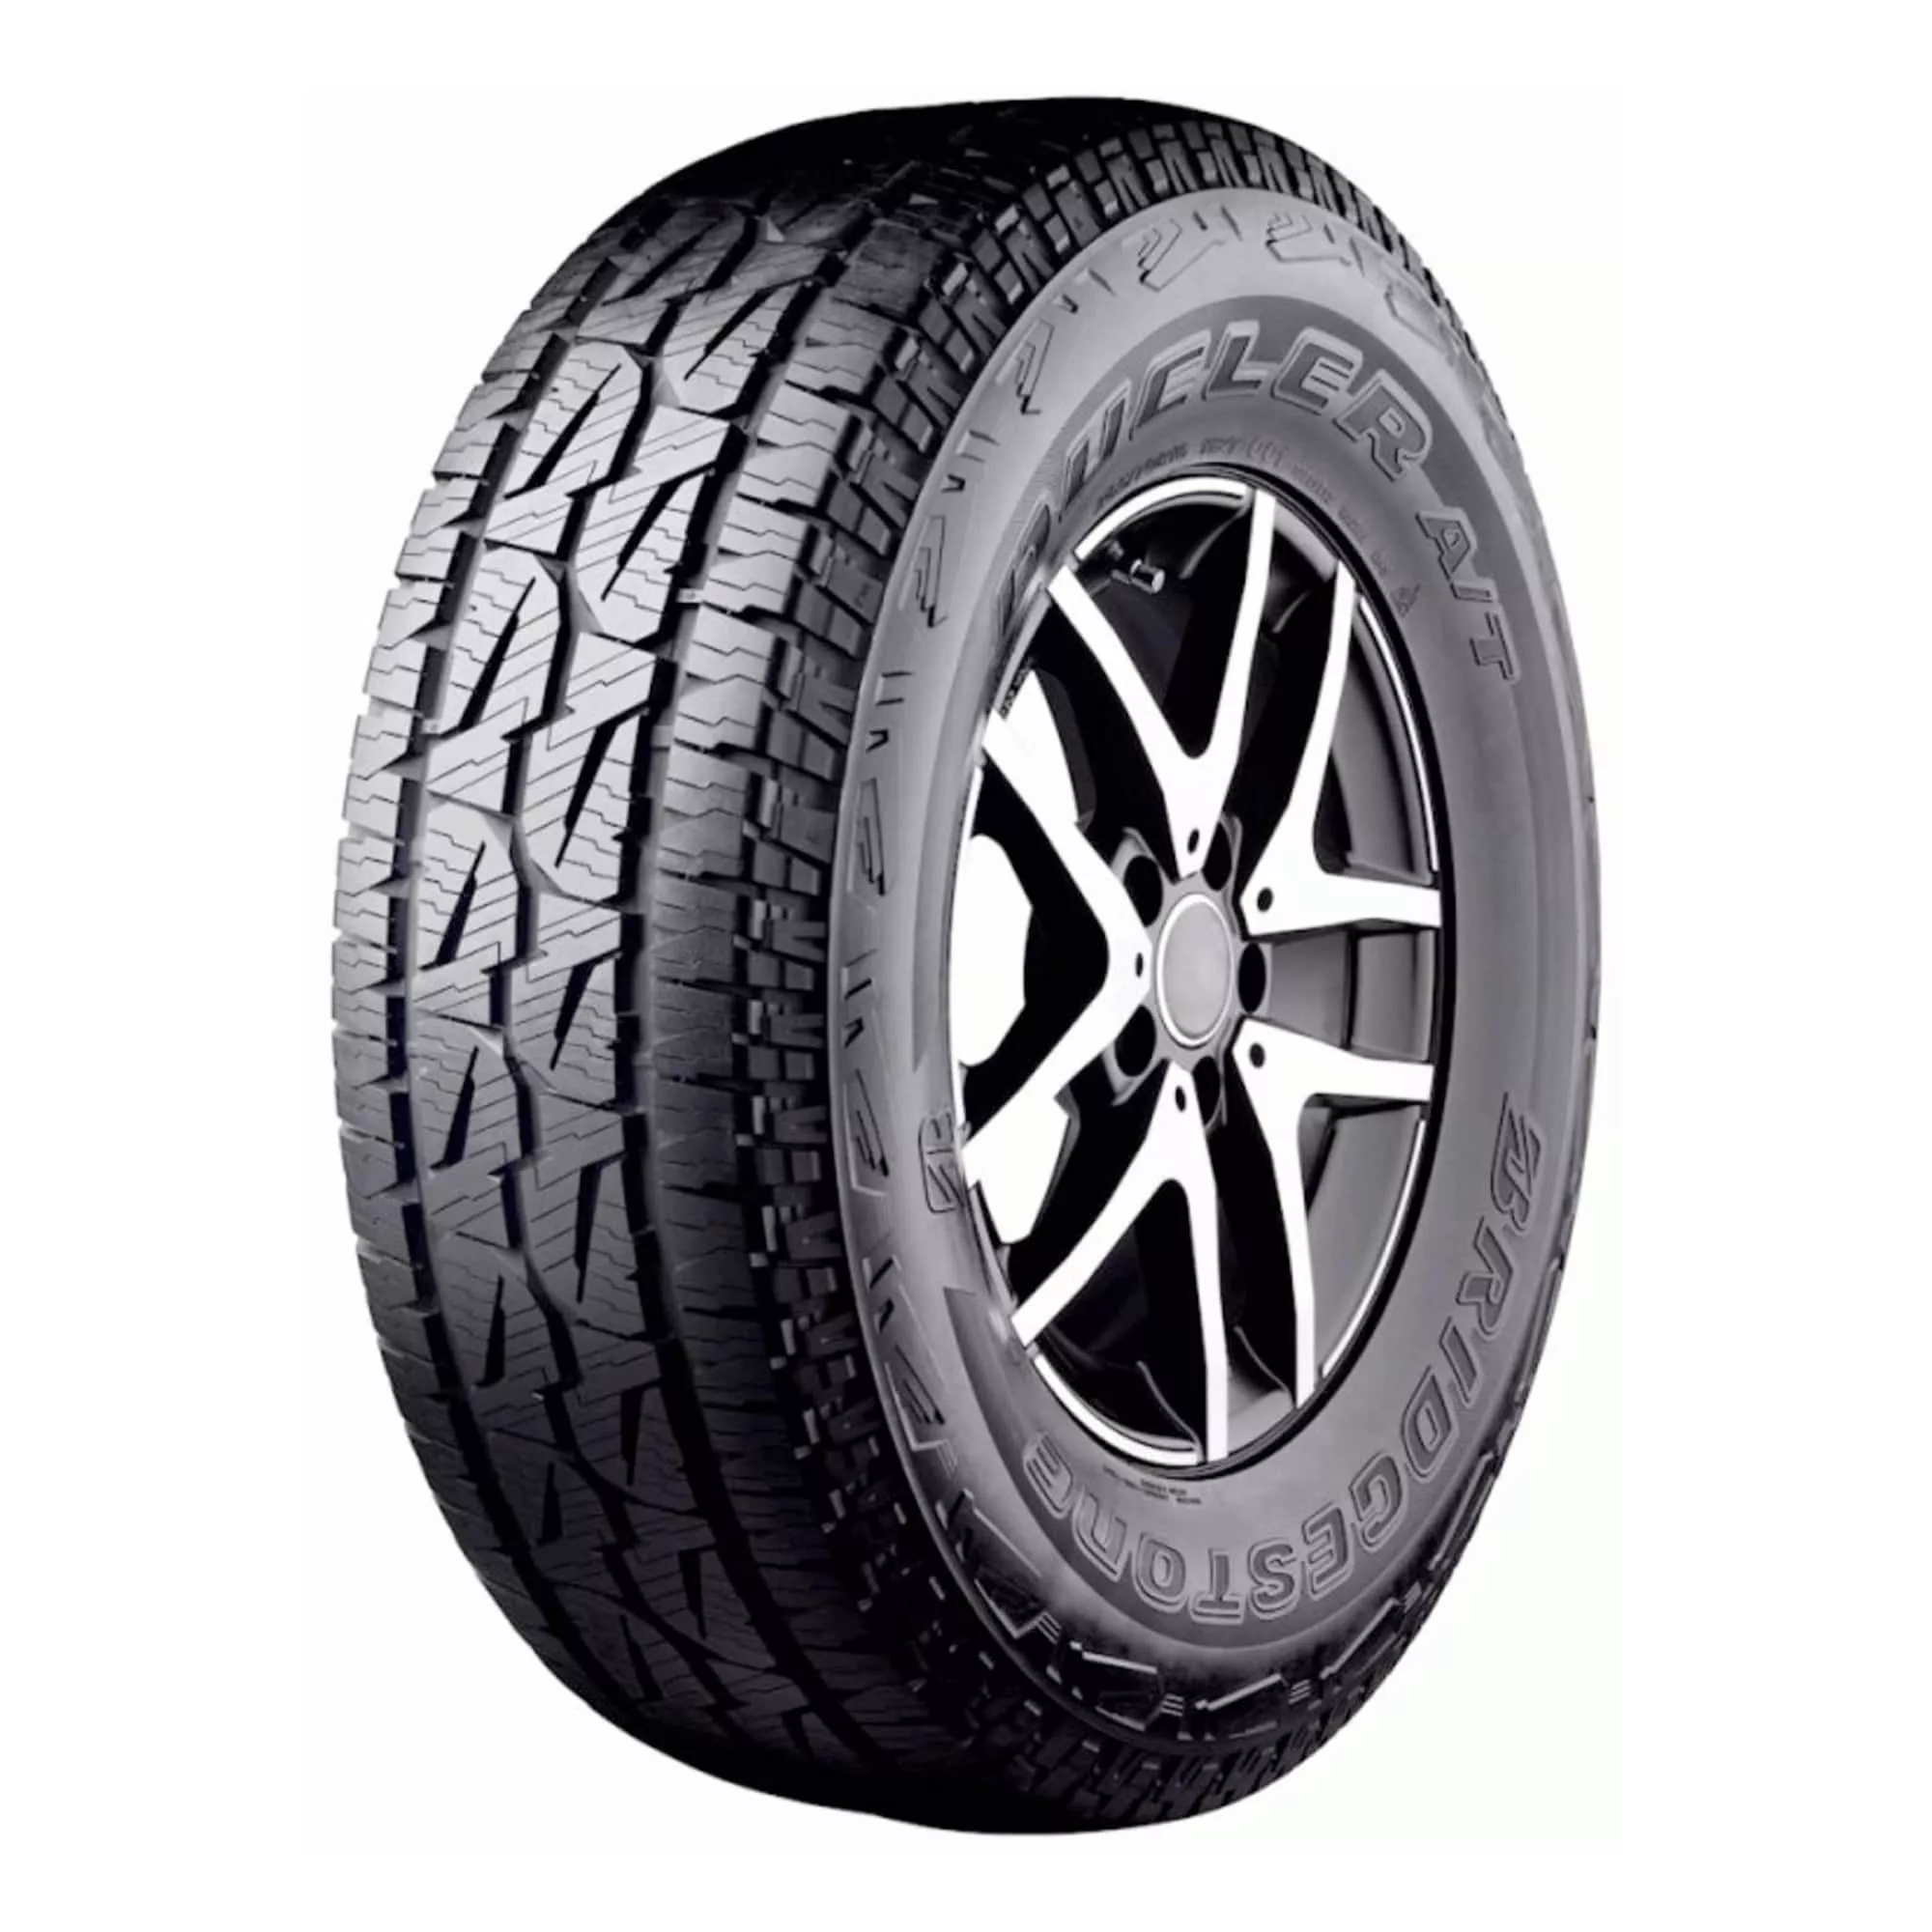 Шина 205/70R15 96S Dueler A/T 001 SUV